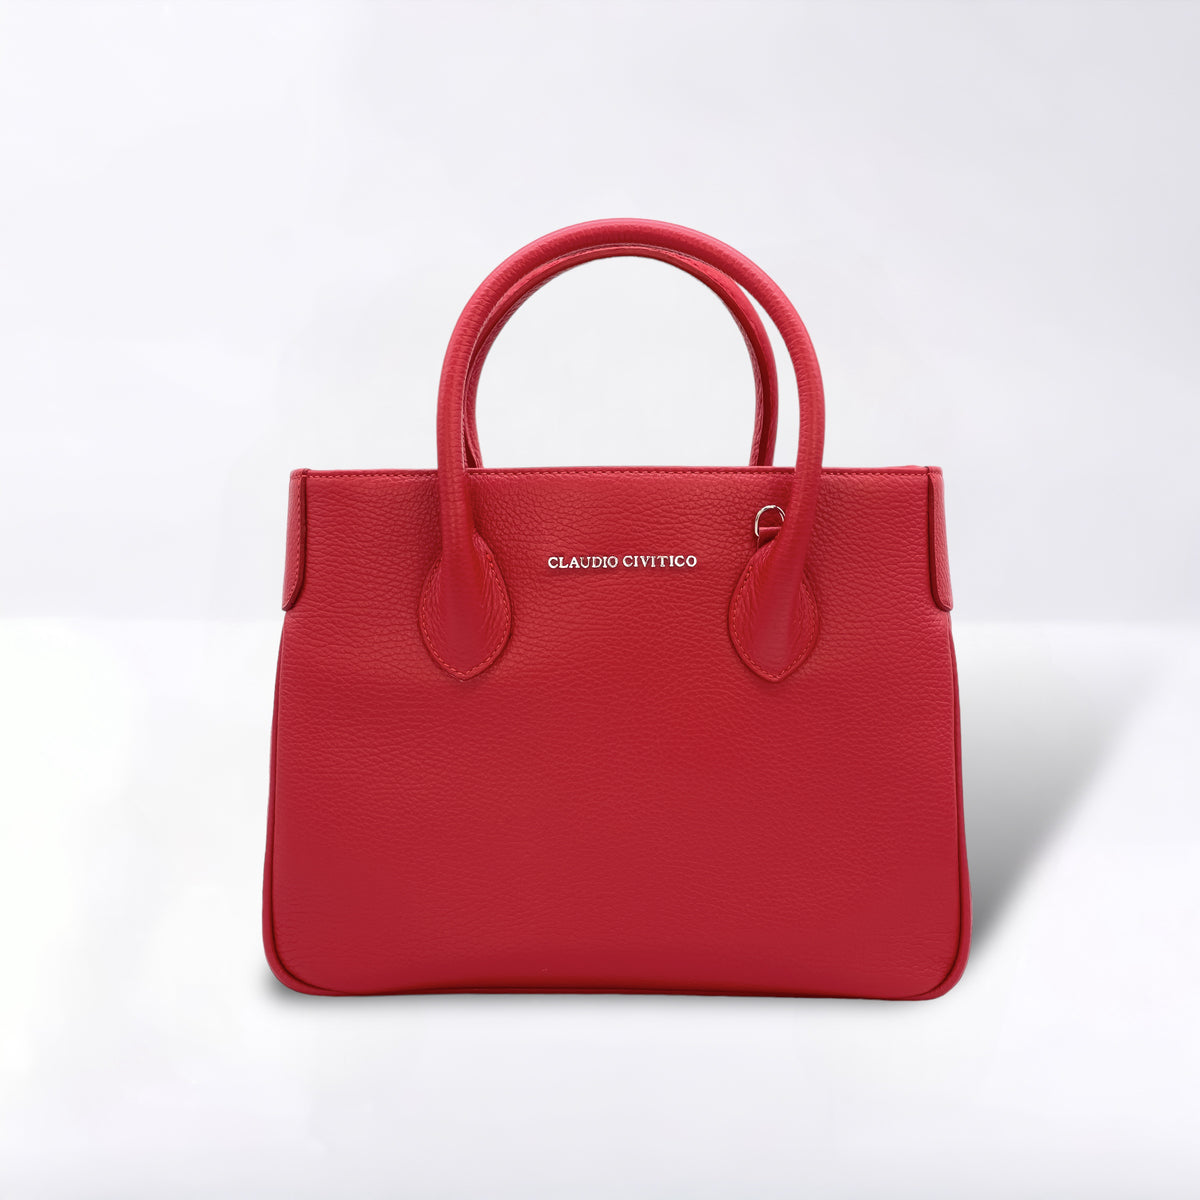 Red Satchel purse with silver hardware